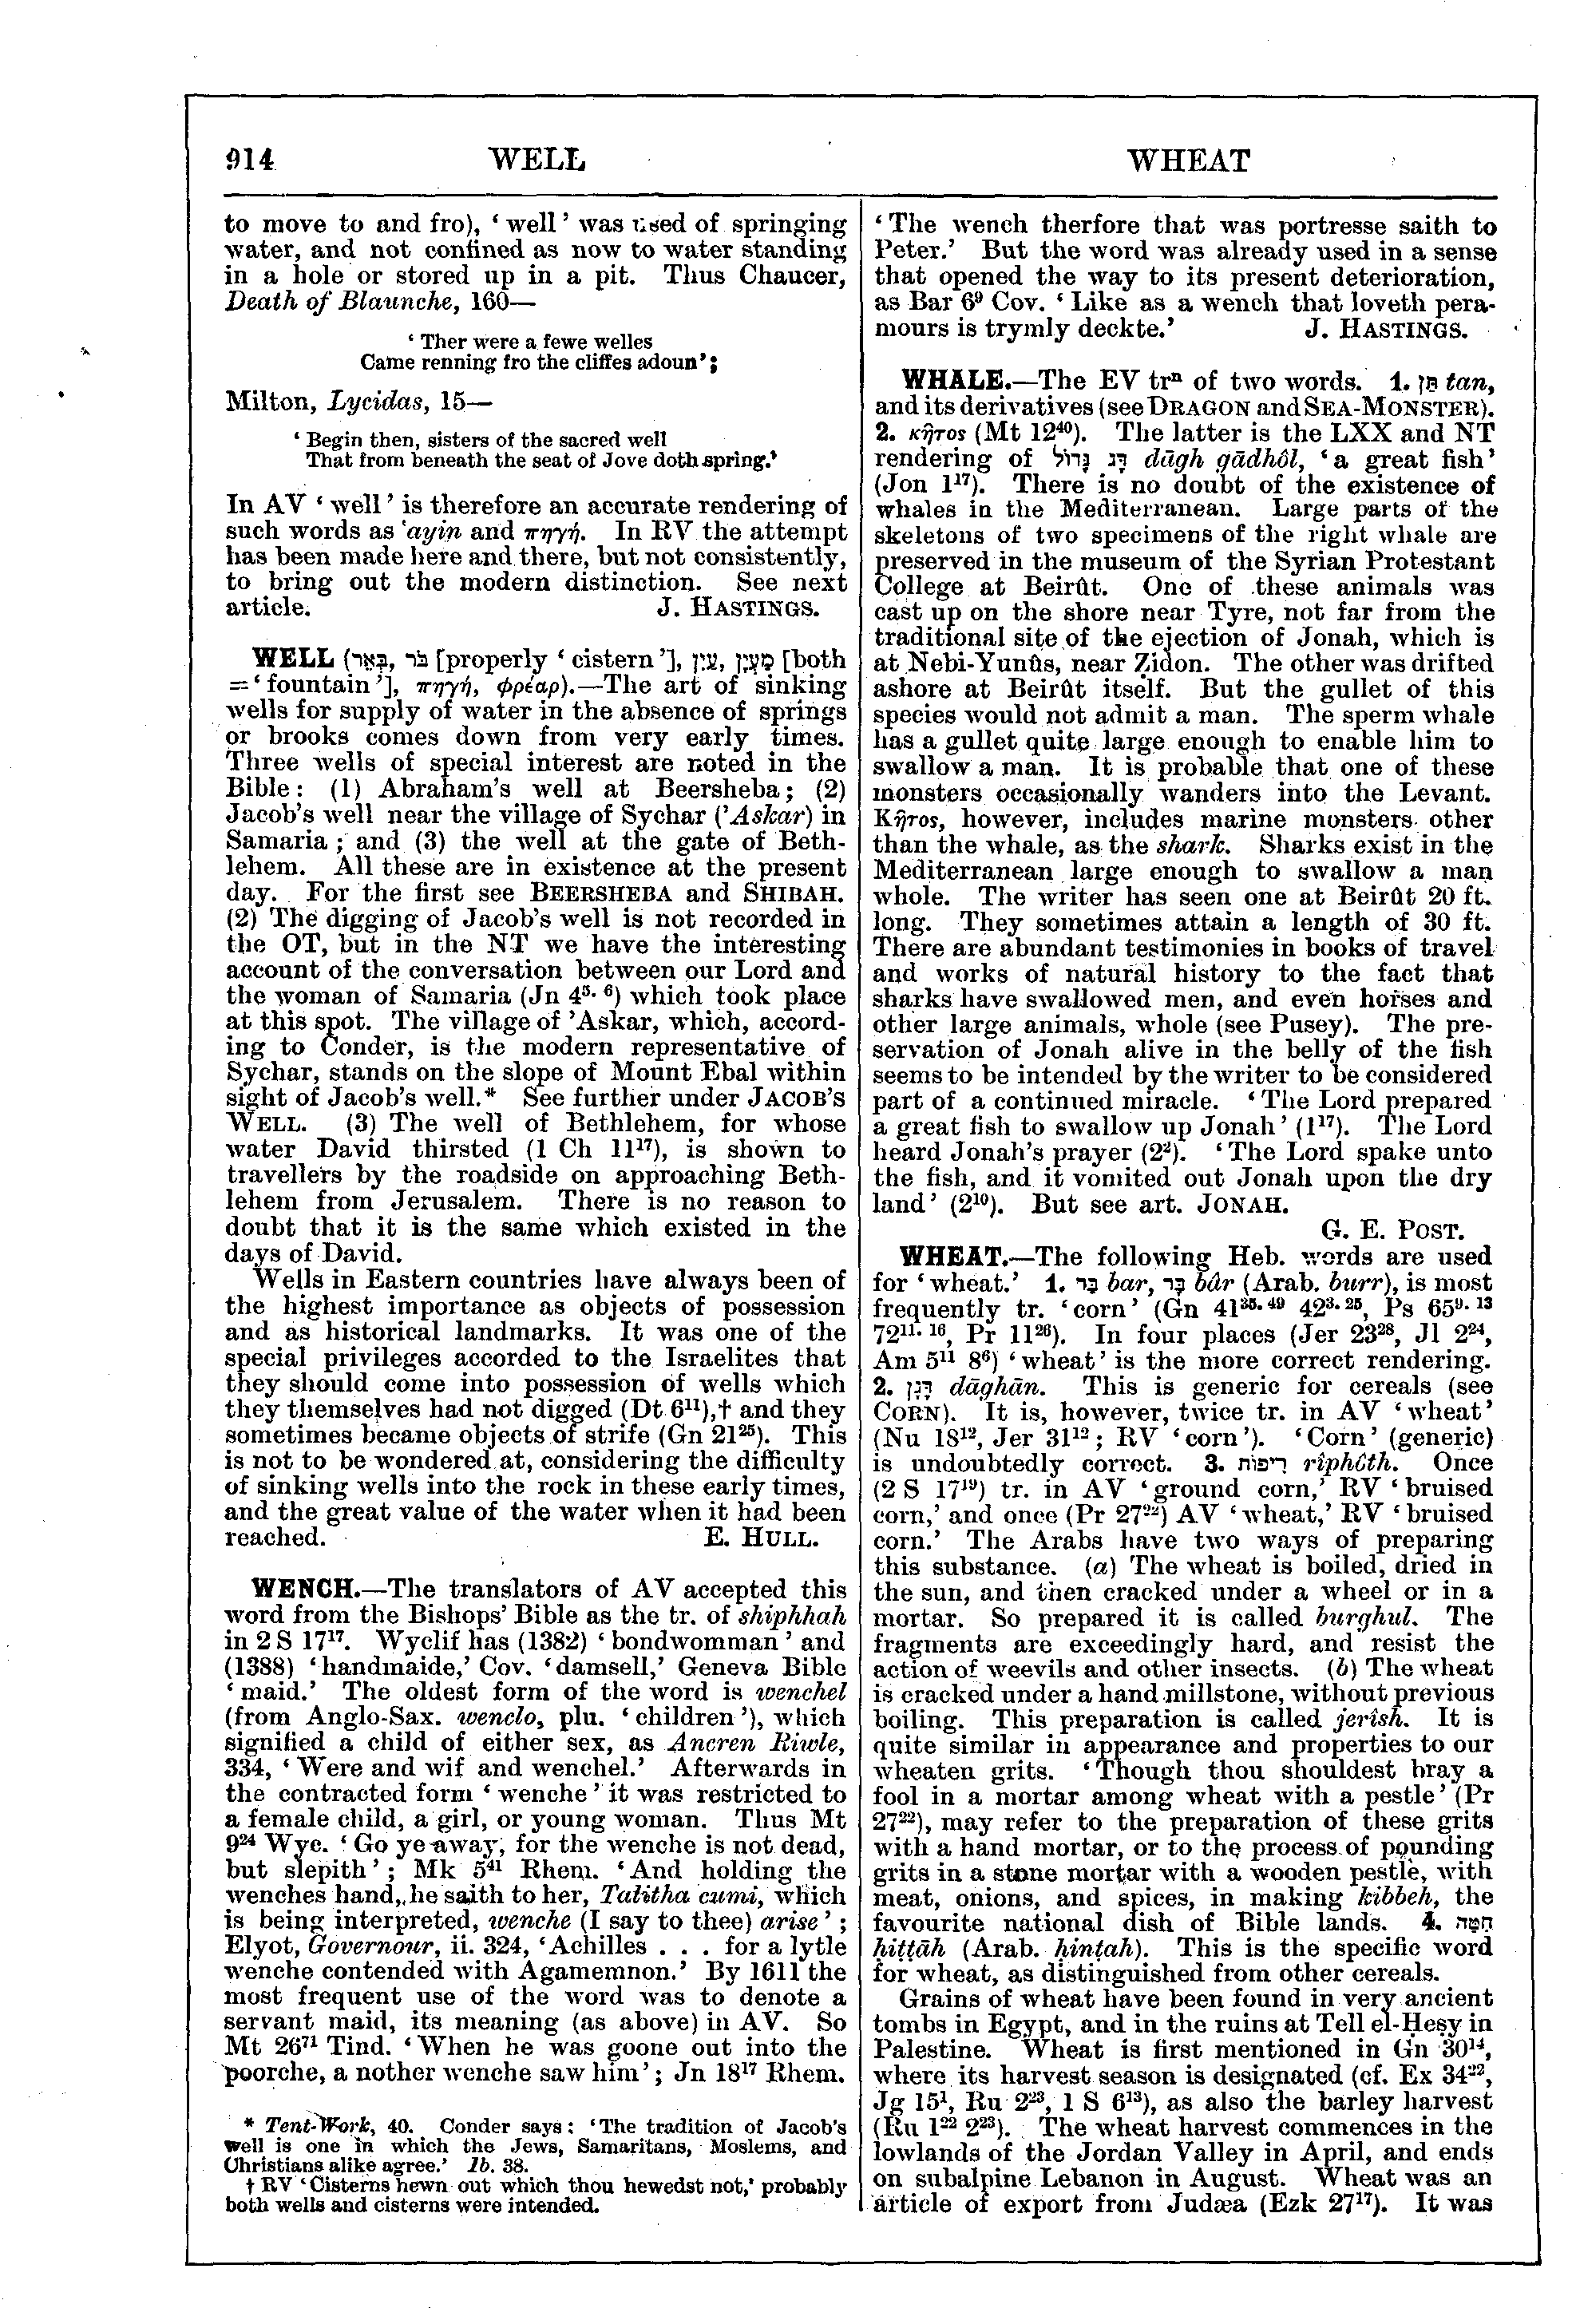 Image of page 914